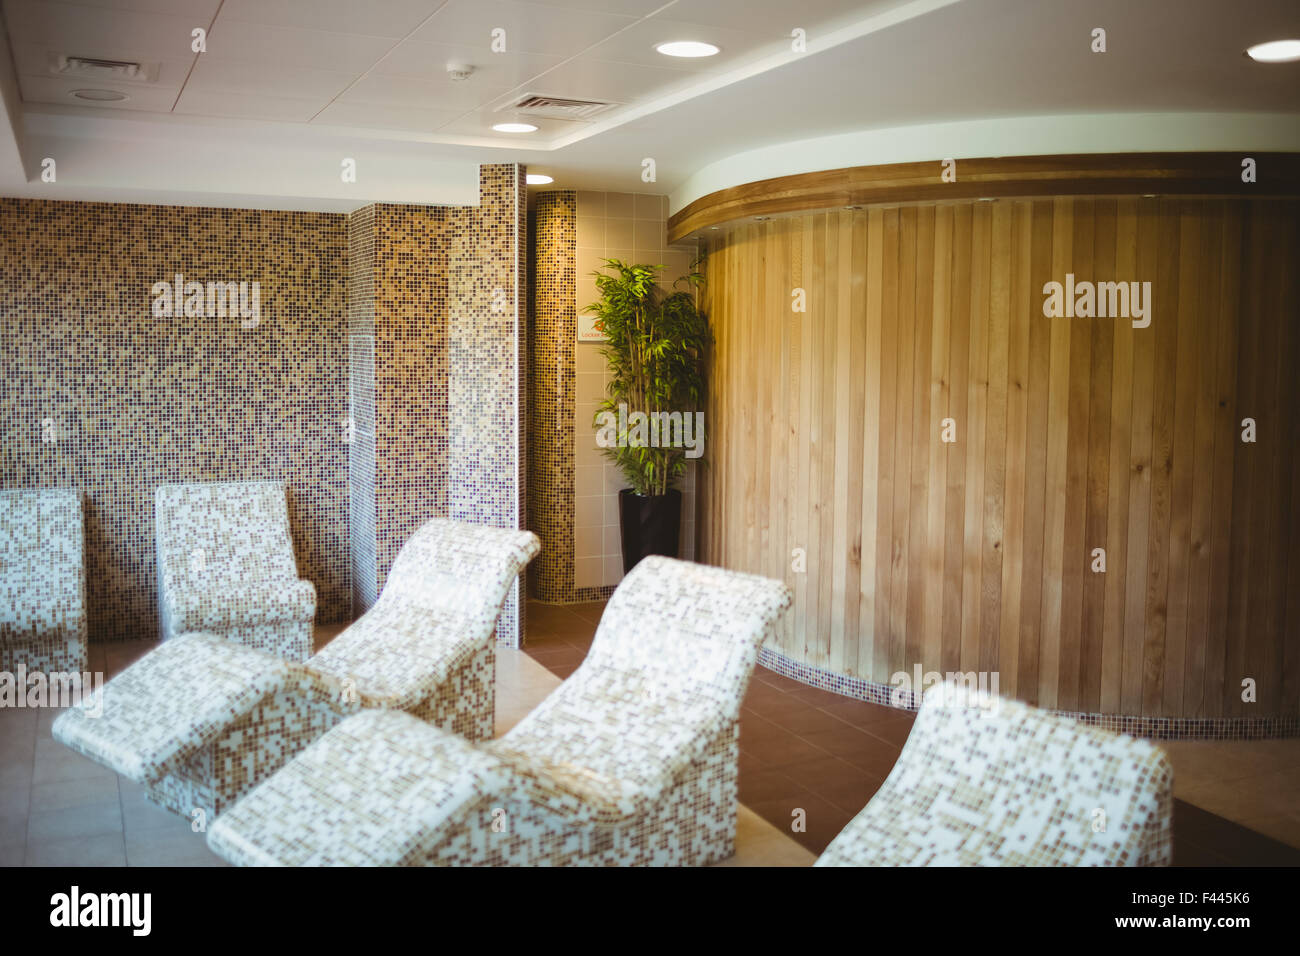 Multiple stone chairs in the sauna suite Stock Photo